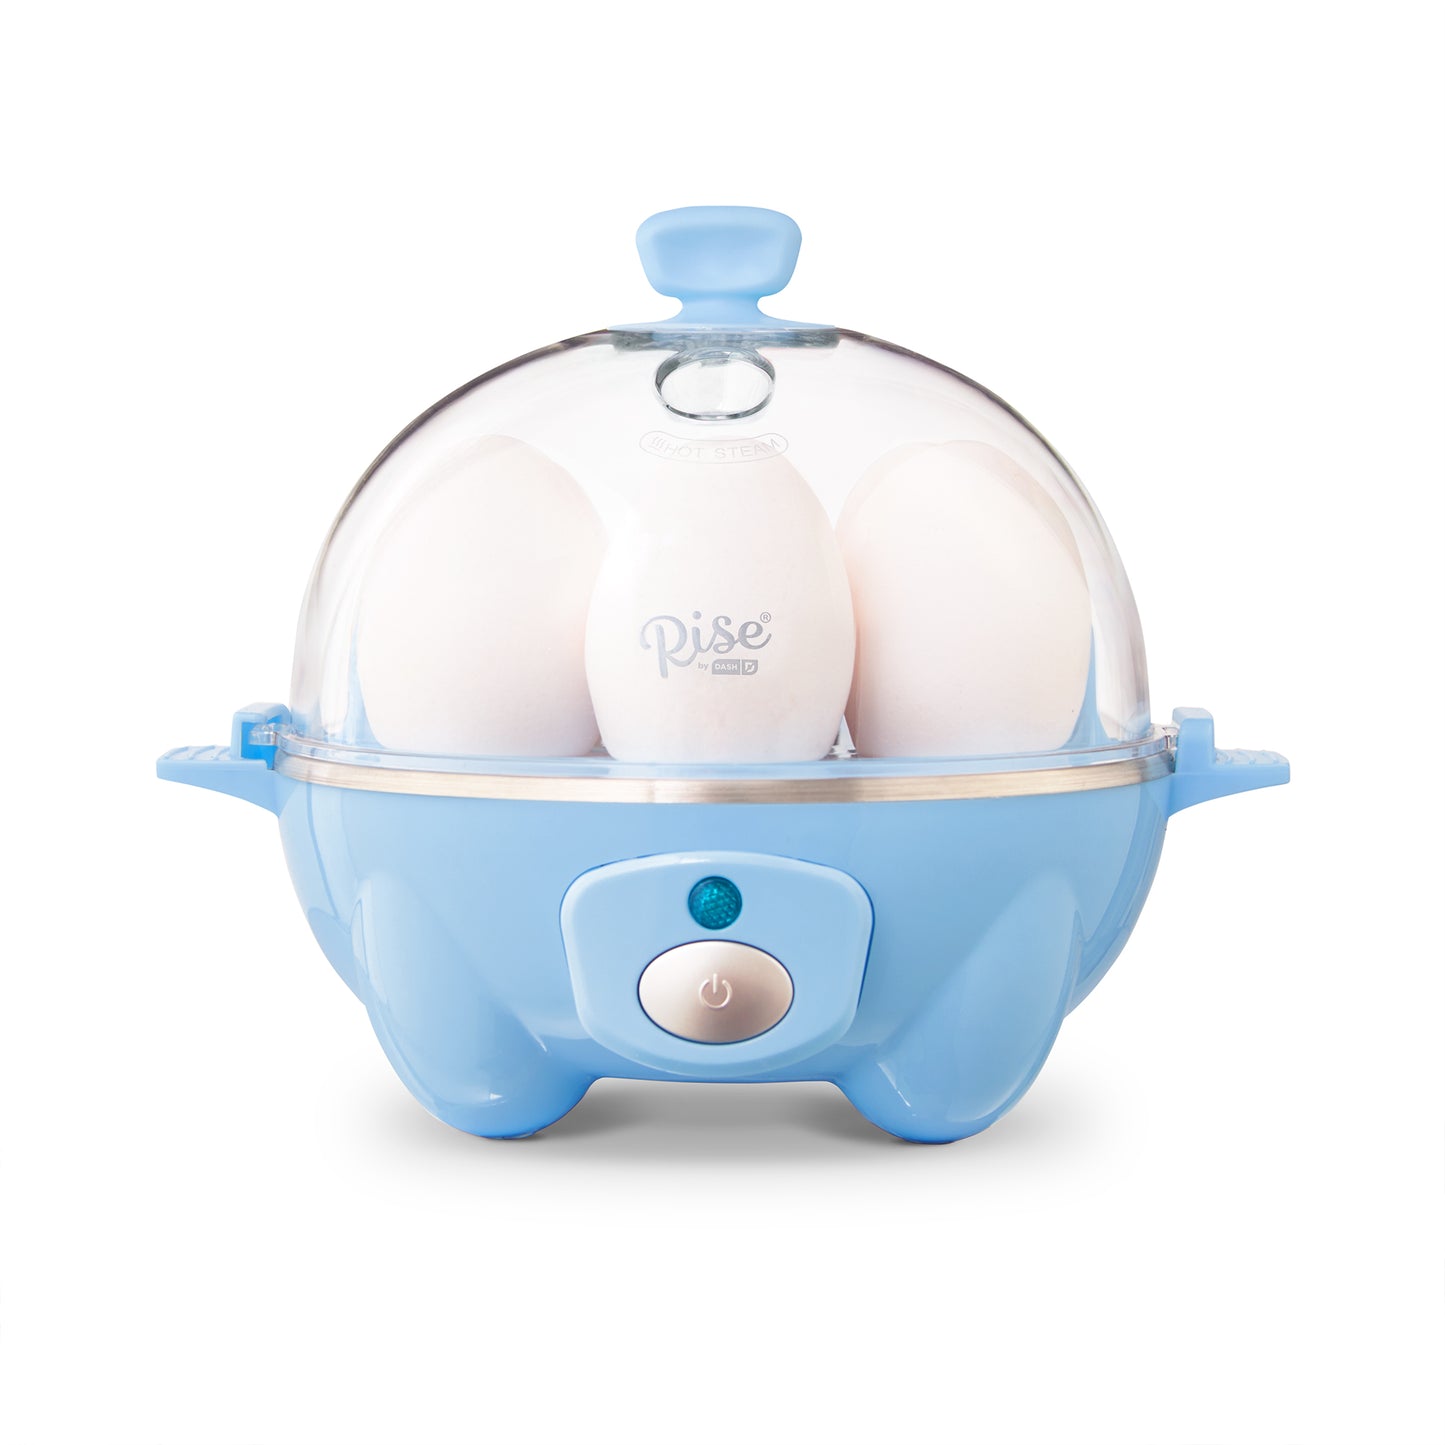 Rise by Dash Egg Cooker egg-cookers Rise by Dash Blue Sky  